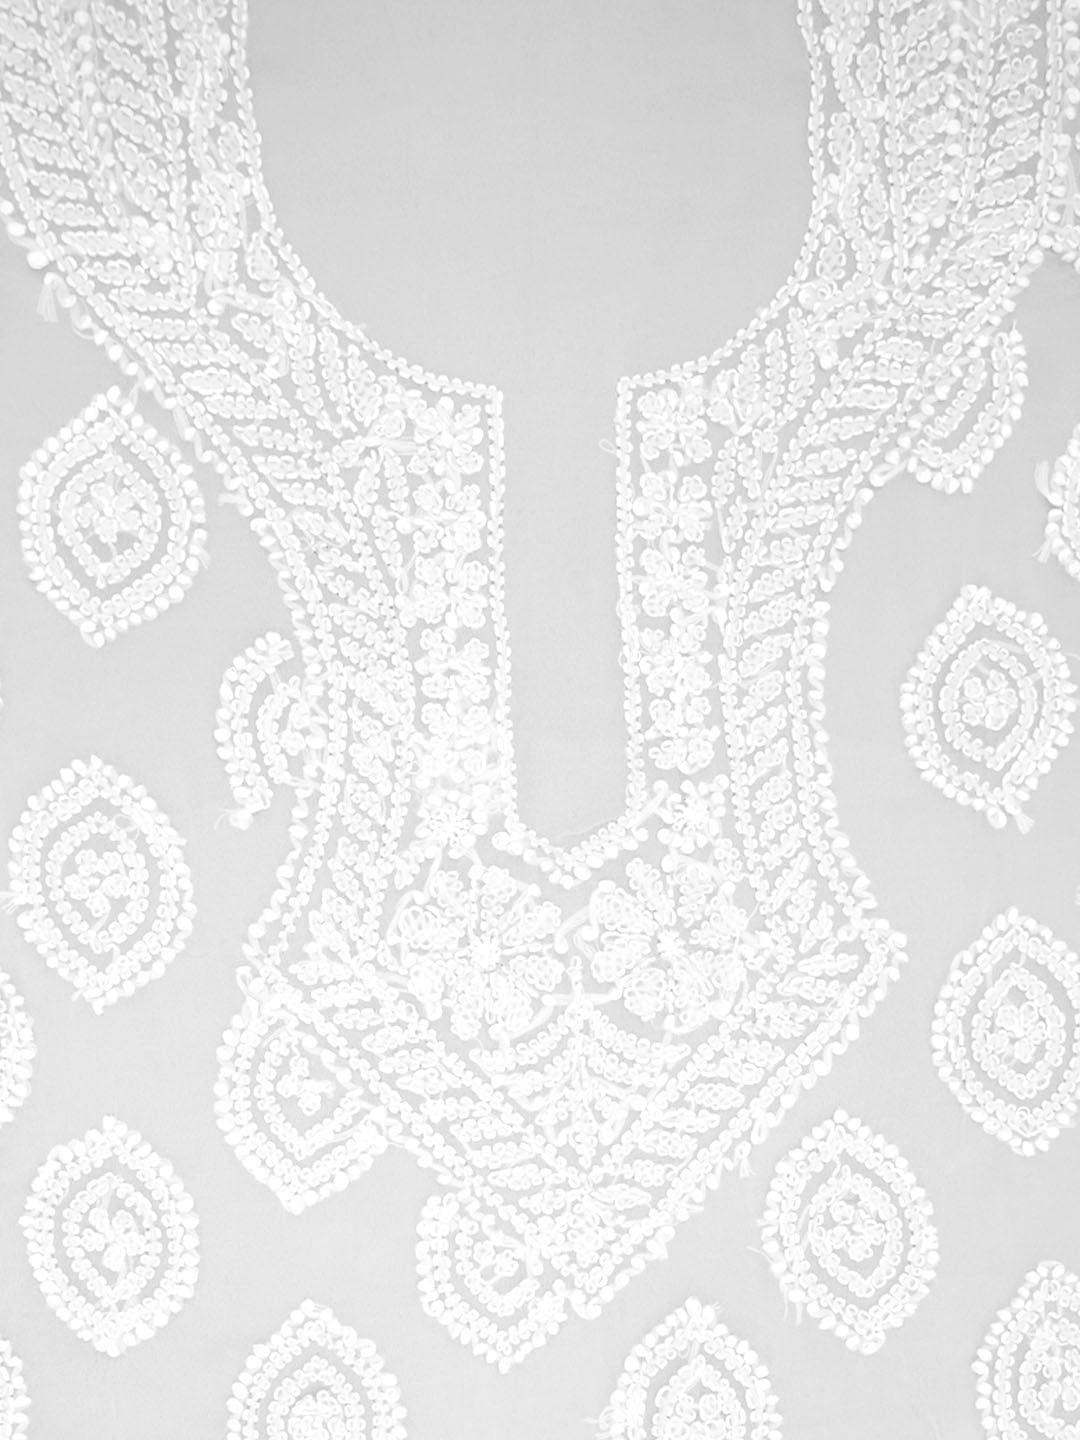 Hand Embroidered Chikankari Georgette Dress Material - PC3695